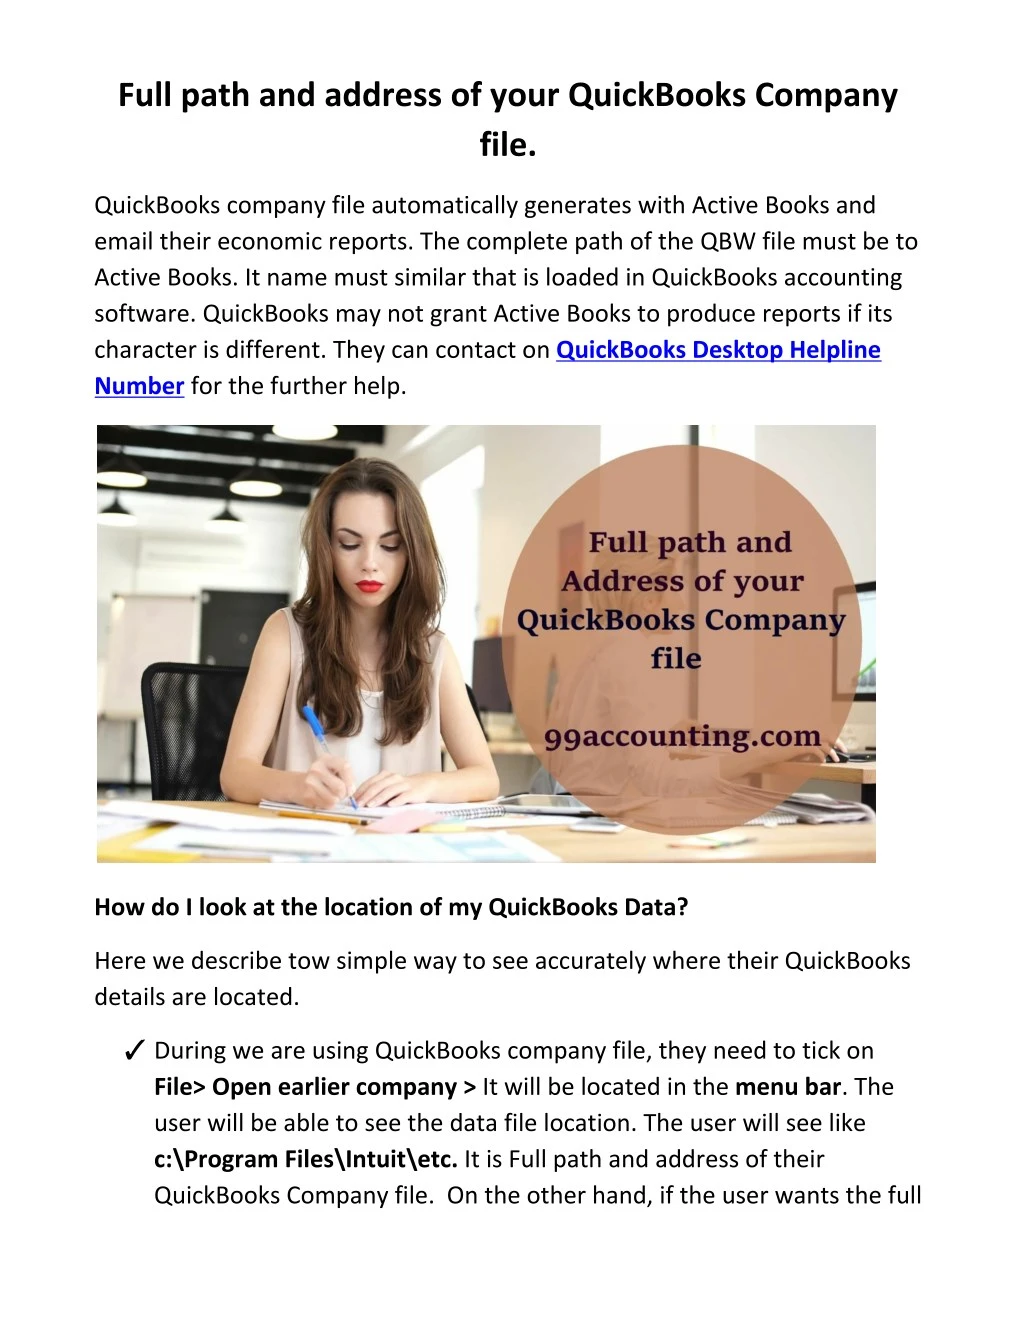 full path and address of your quickbooks company